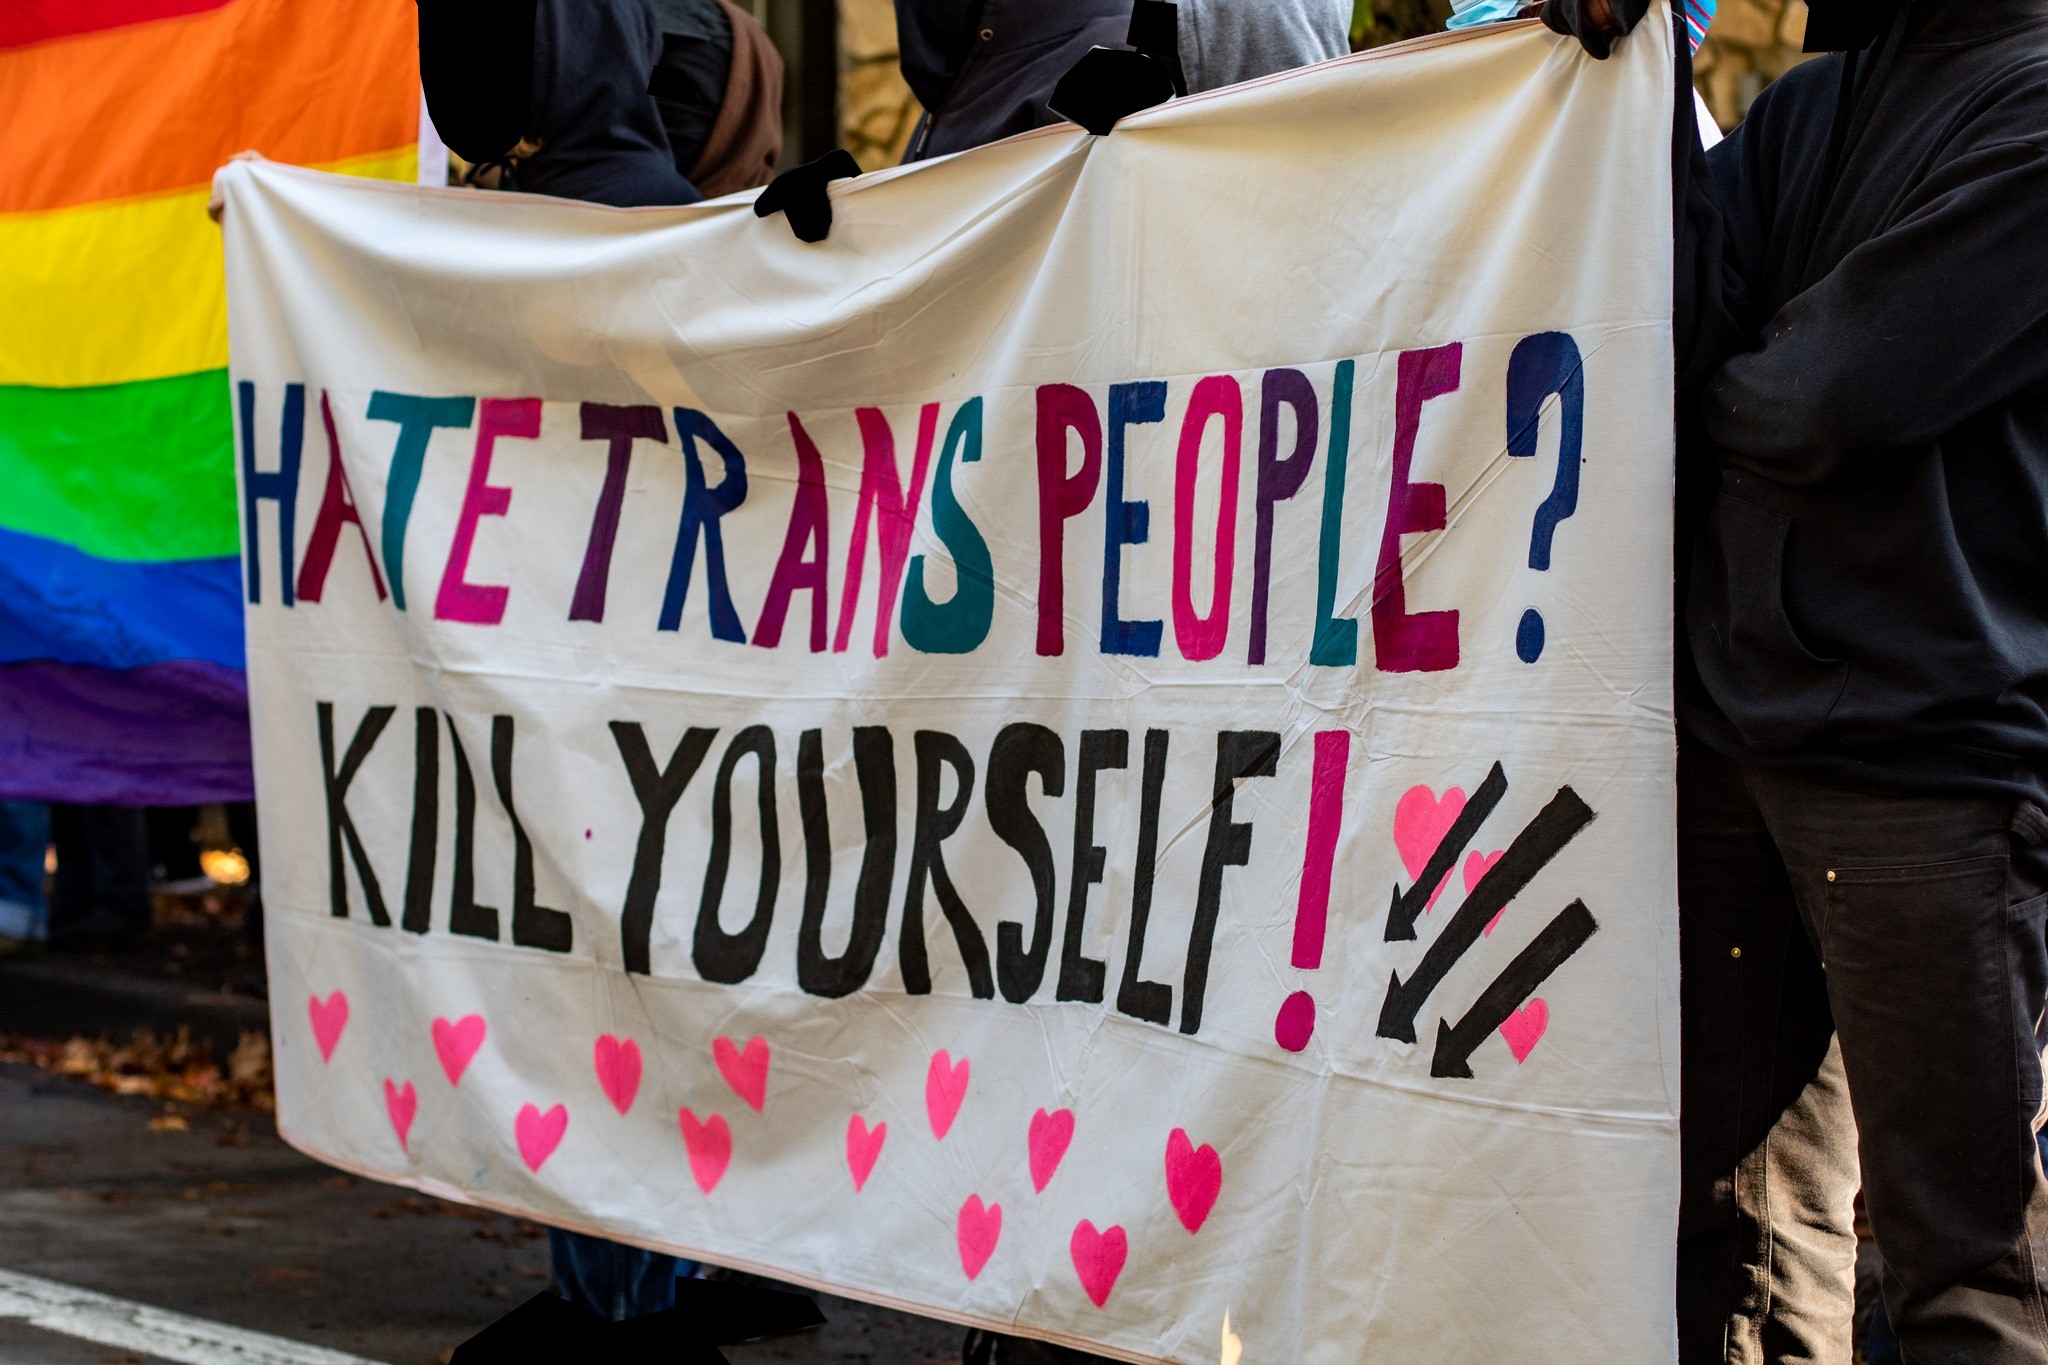 multi-colored banner reads "Hate Trans People? Kill Yourself!"